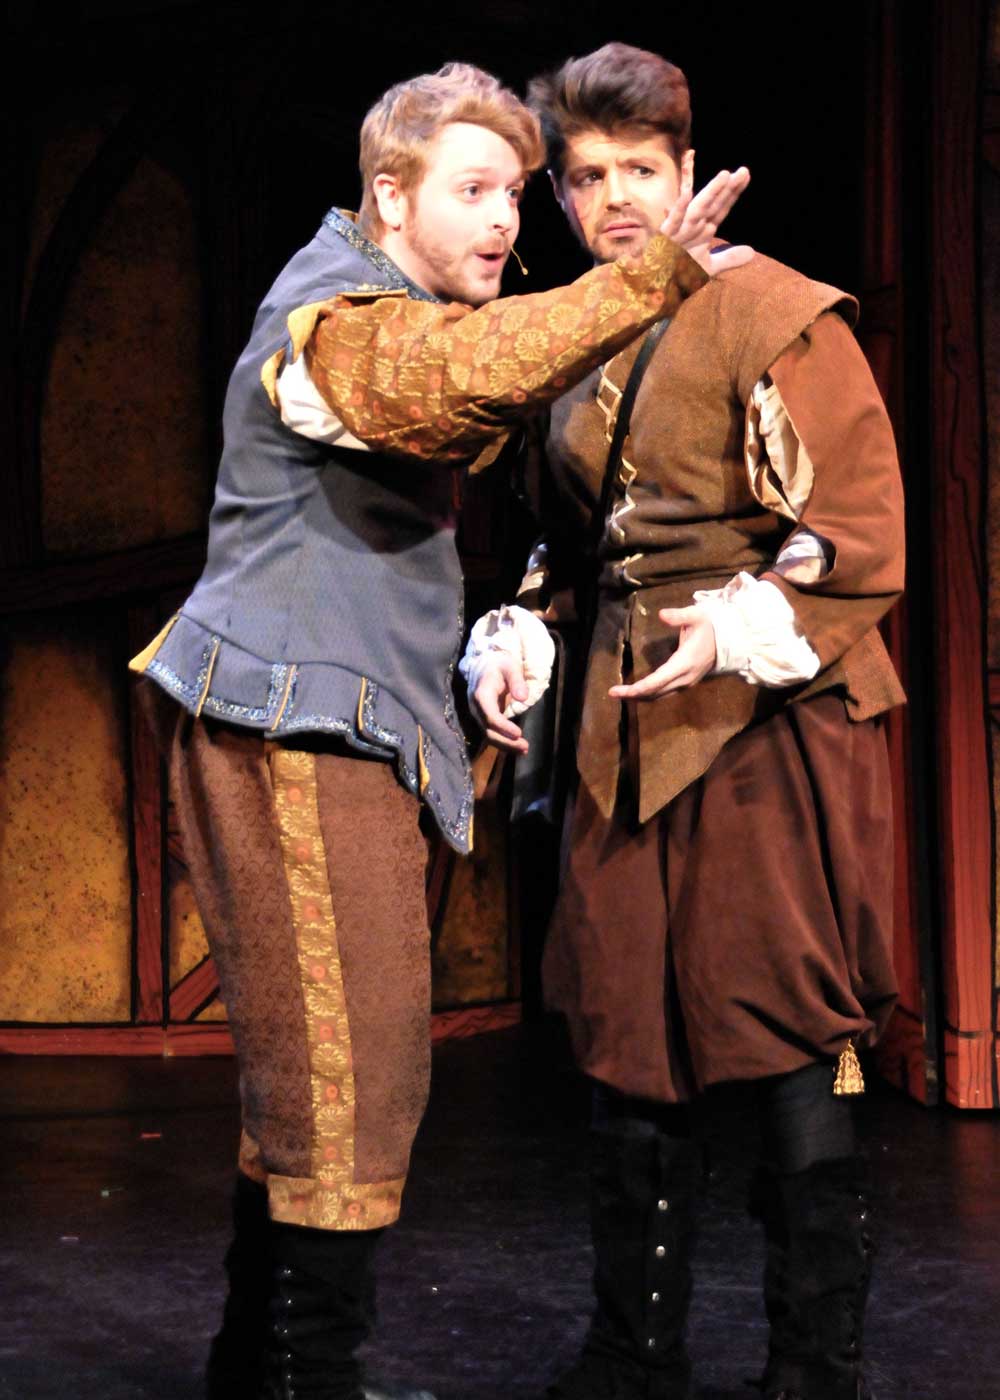 Brendan Long and Erik Montague as the Bottom brothers in Something Rotten! at Lakewood Theatre Company, Lake Oswego, Oregon. Photo by Triumph Photography